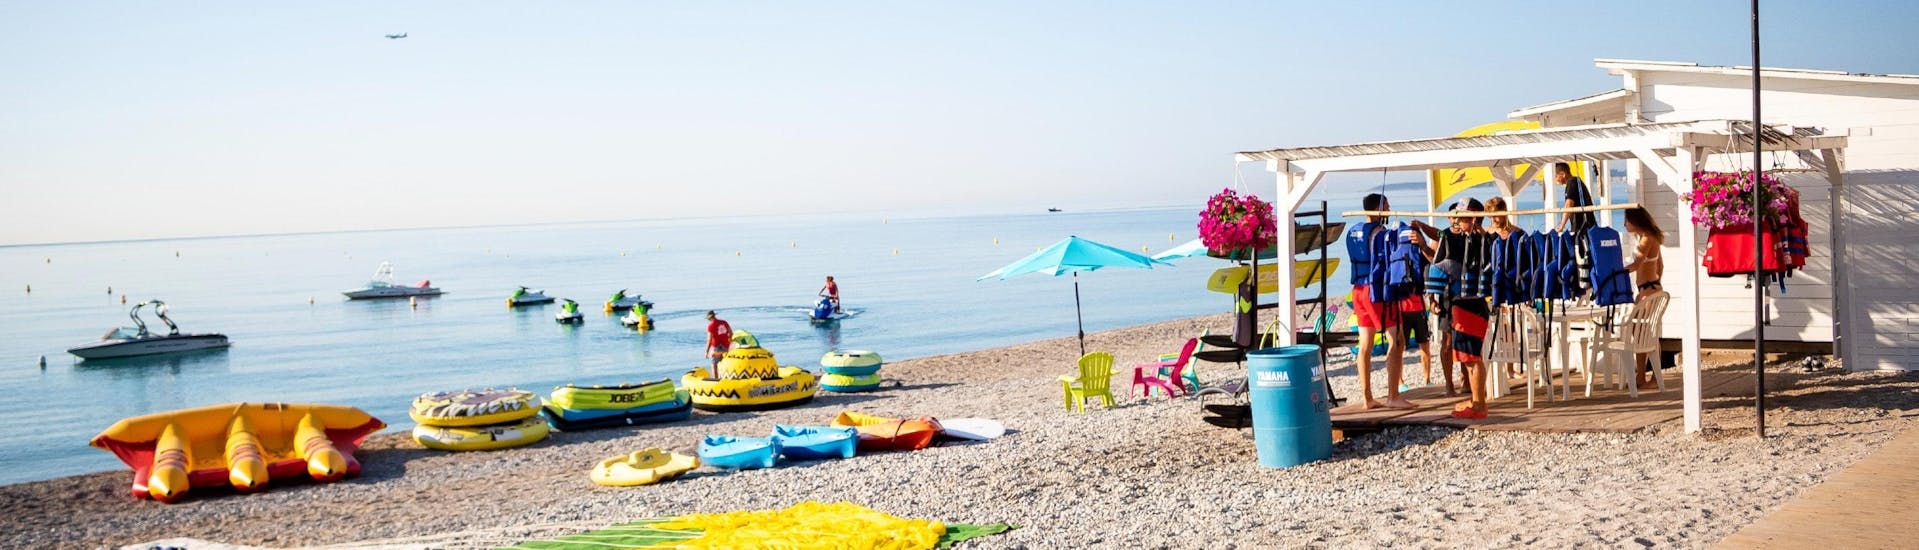 View of the beach in front of Plage des Marines's base in Villeneuve-Loubet and Cagnes-sur-Mer where watersport activities take place.